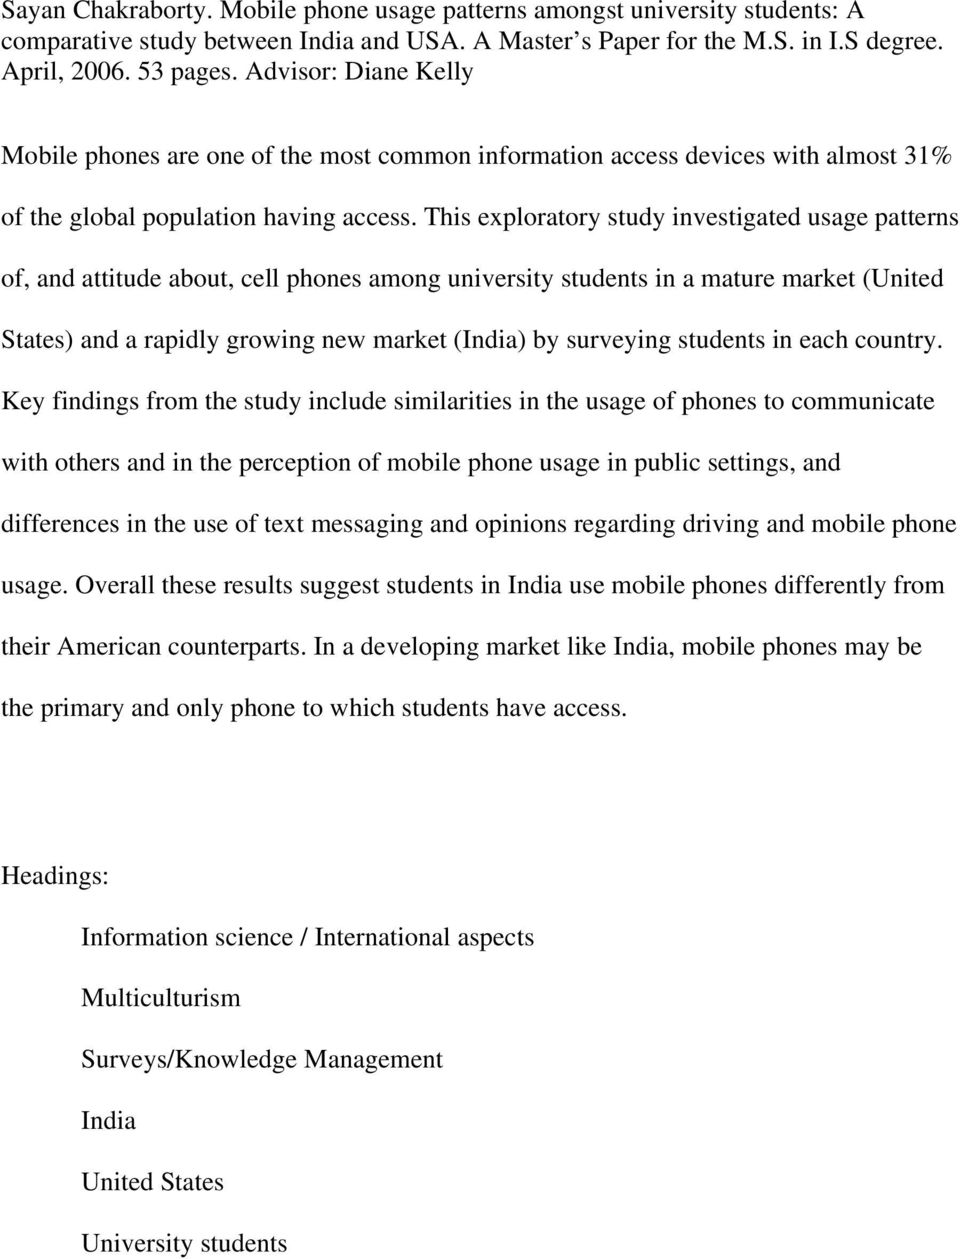 This exploratory study investigated usage patterns of, and attitude about, cell phones among university students in a mature market (United States) and a rapidly growing new market (India) by